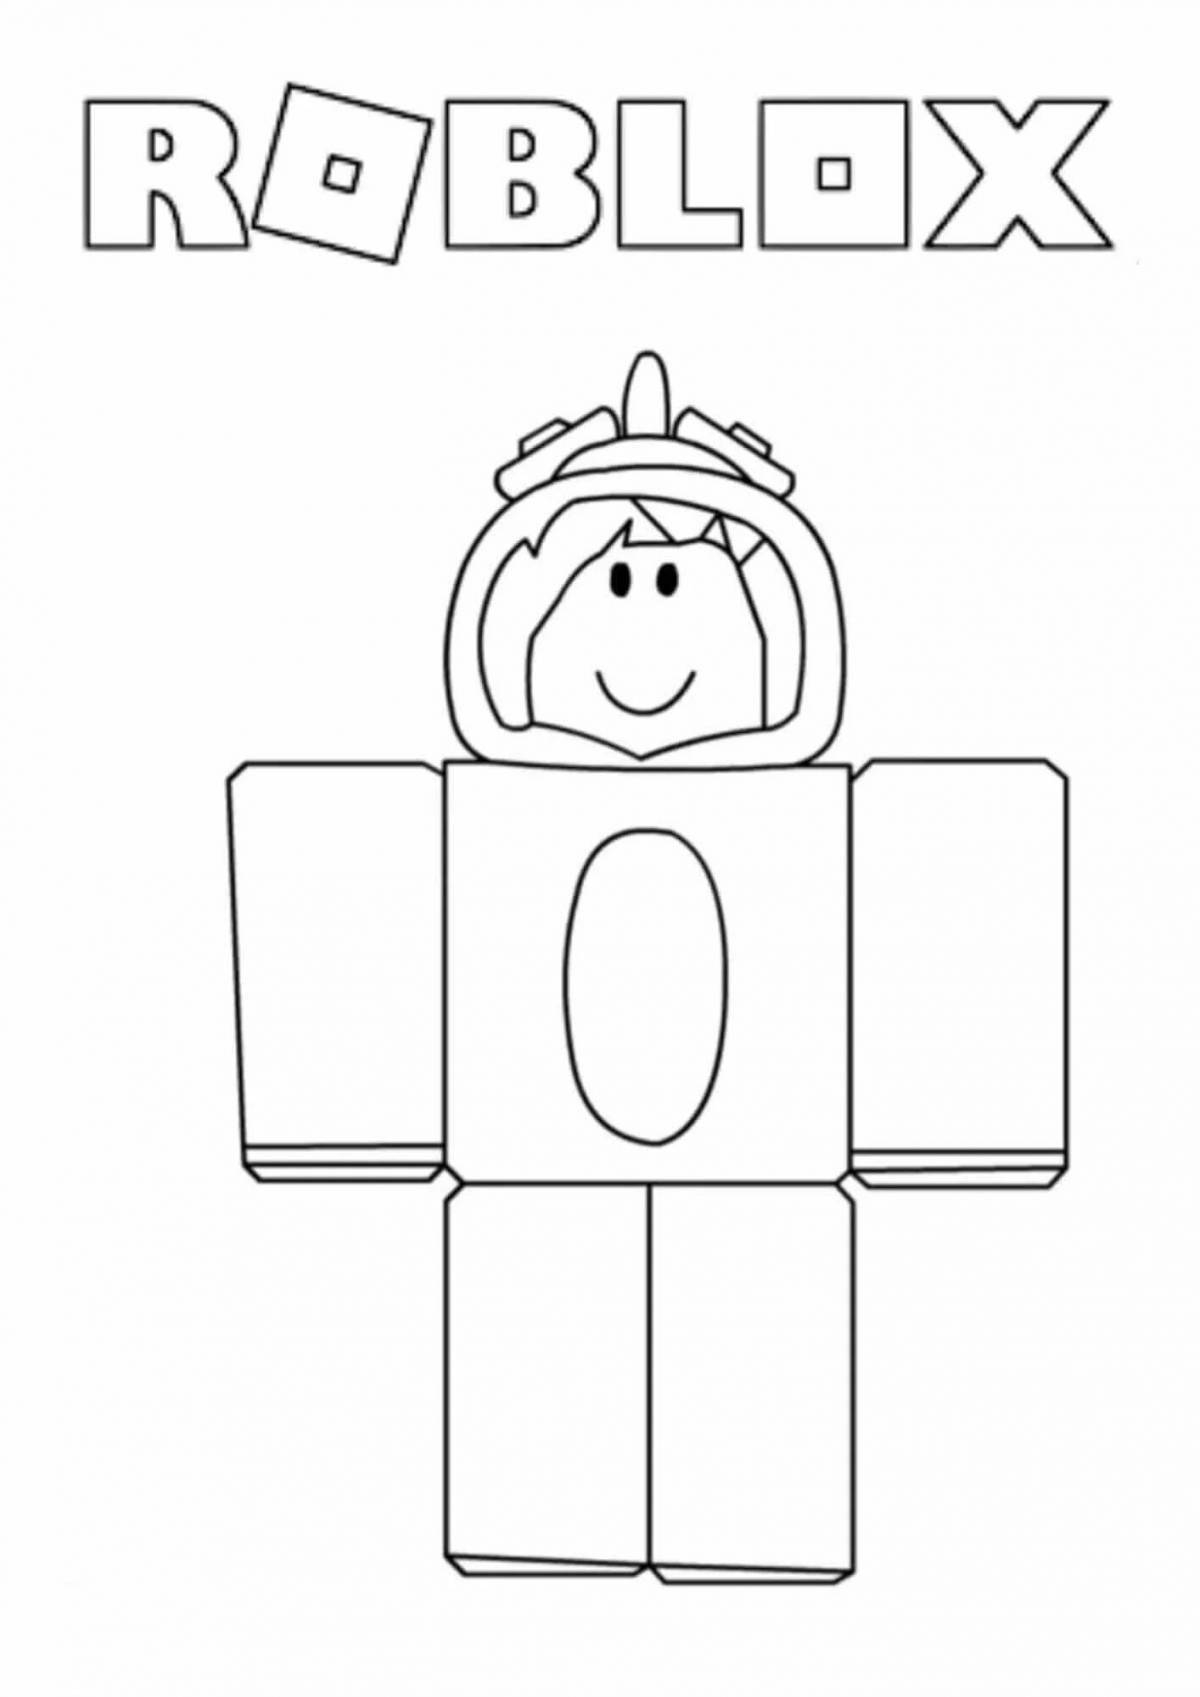 Roblox magic coloring book for girls